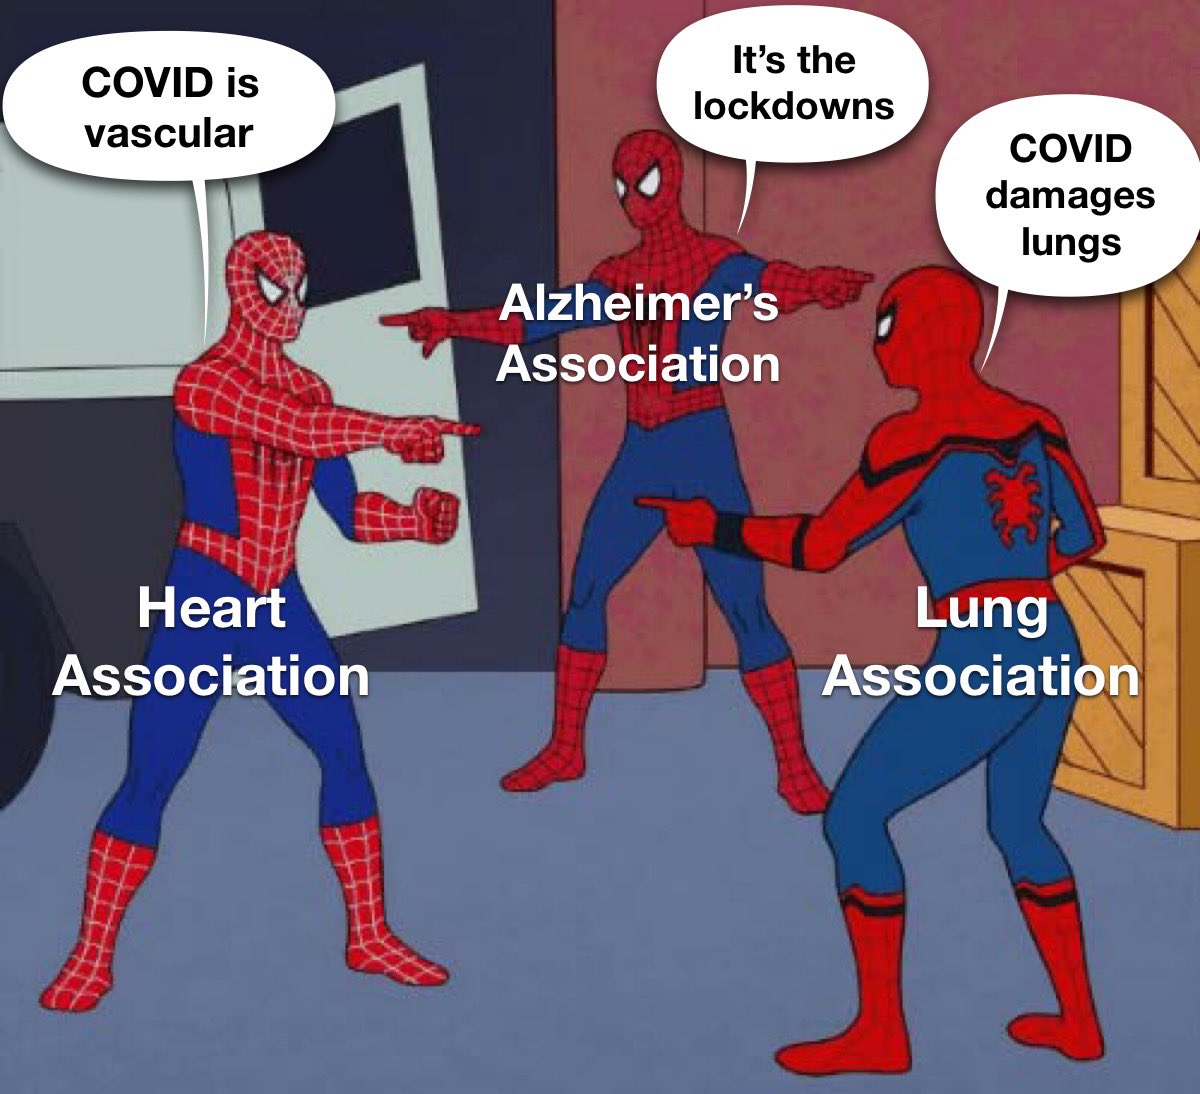 Very interesting how people can look at the same circumstances and studies, and interpret them so differently. You would think that each of these organizations would be taking a comprehensive look at the actual impact of COVID infections.